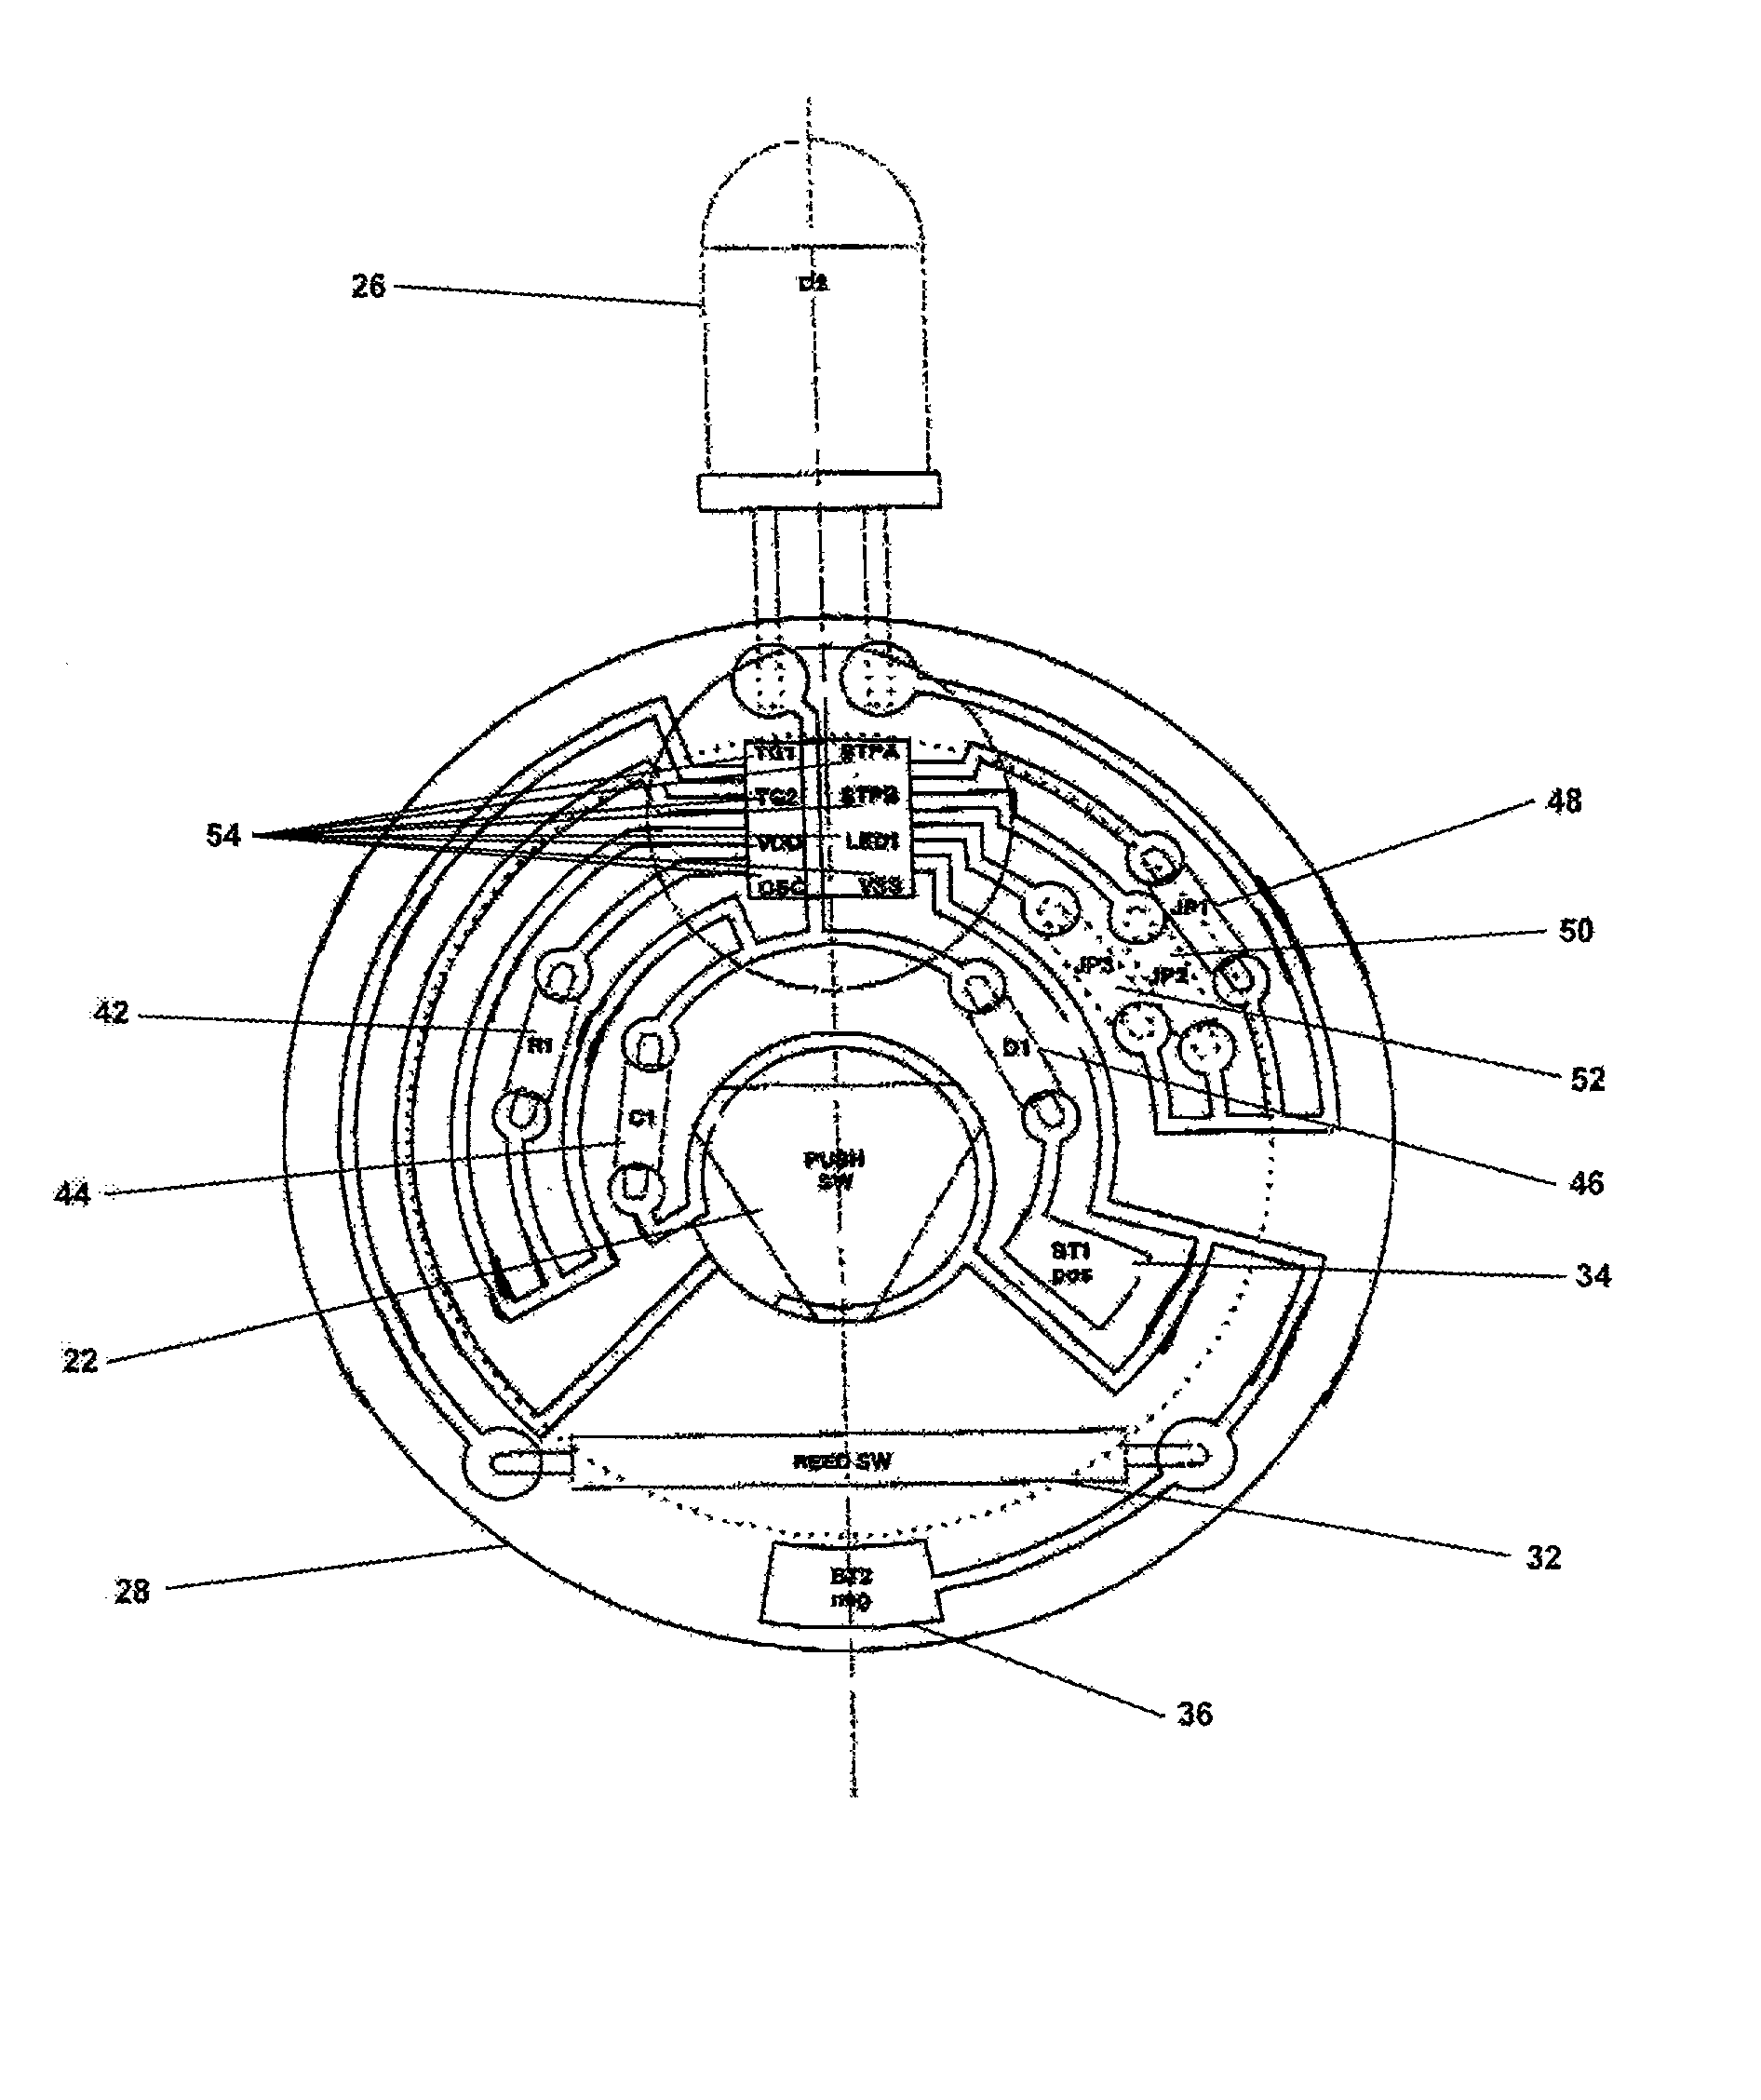 Modular lighting device and actuation system